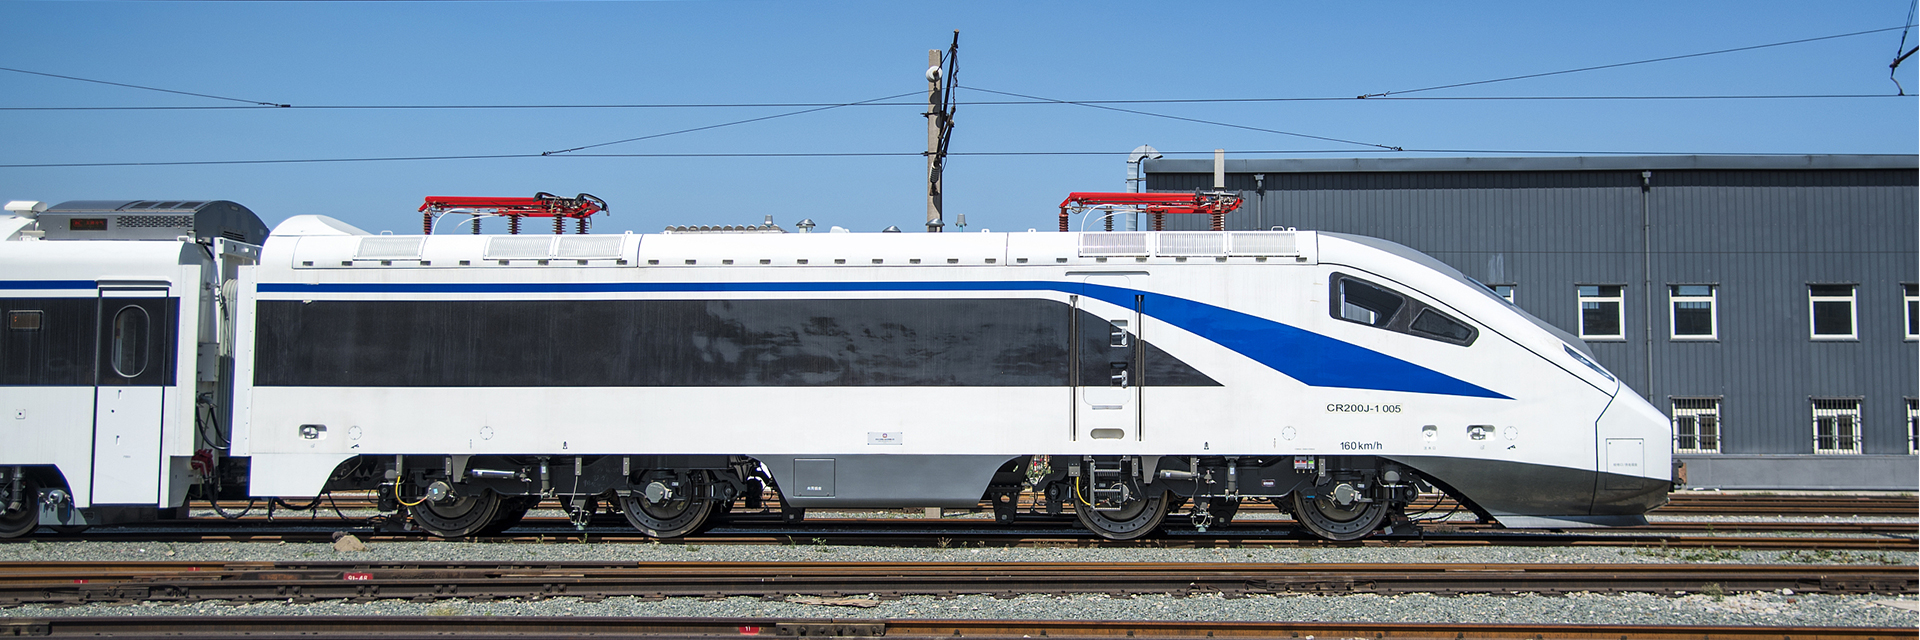 Building the National High-speed Rail Brand